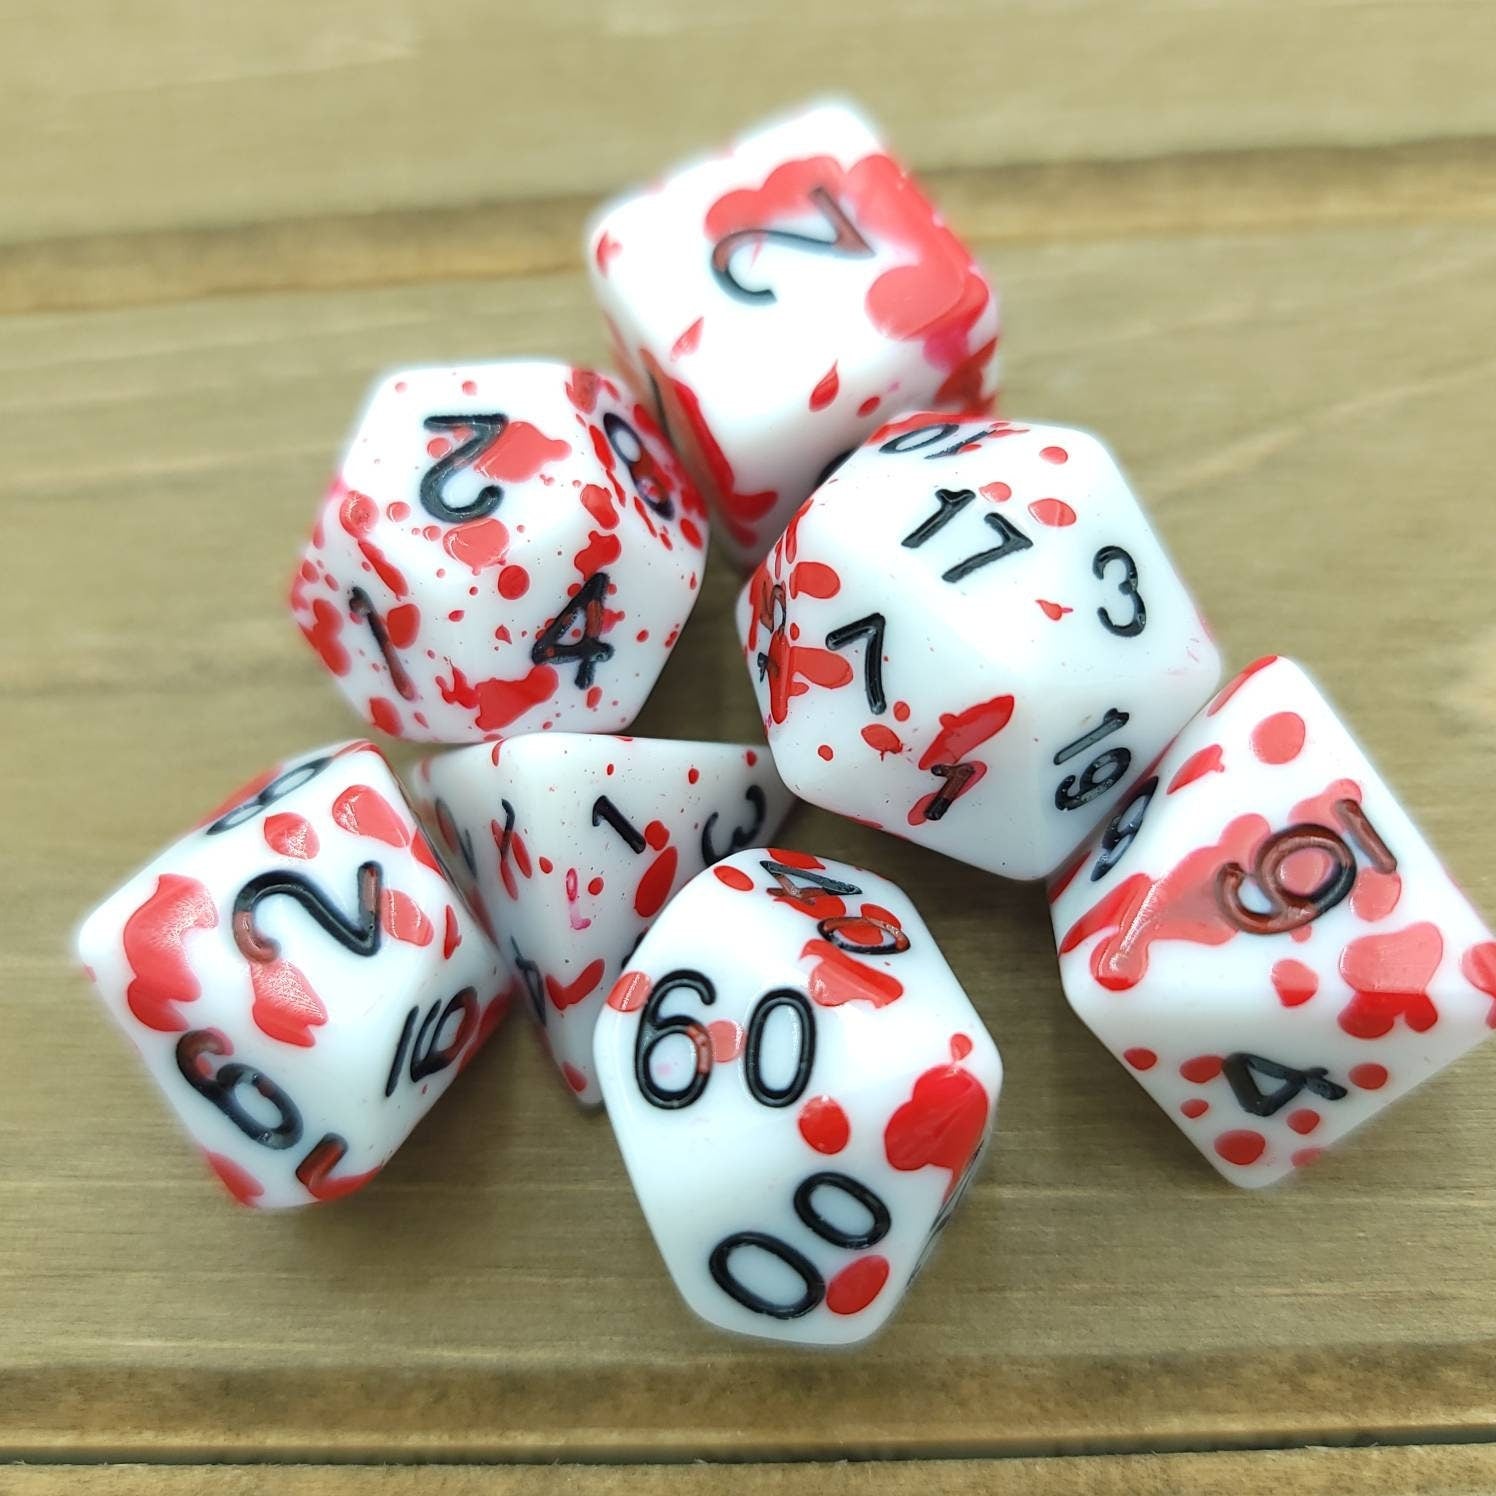 Blood Spatter | RPG Dice Set| RPG Dice | Polyhedral Dice Set | Dungeons and Dragons | DnD Dice Set | Gaming Dice Set